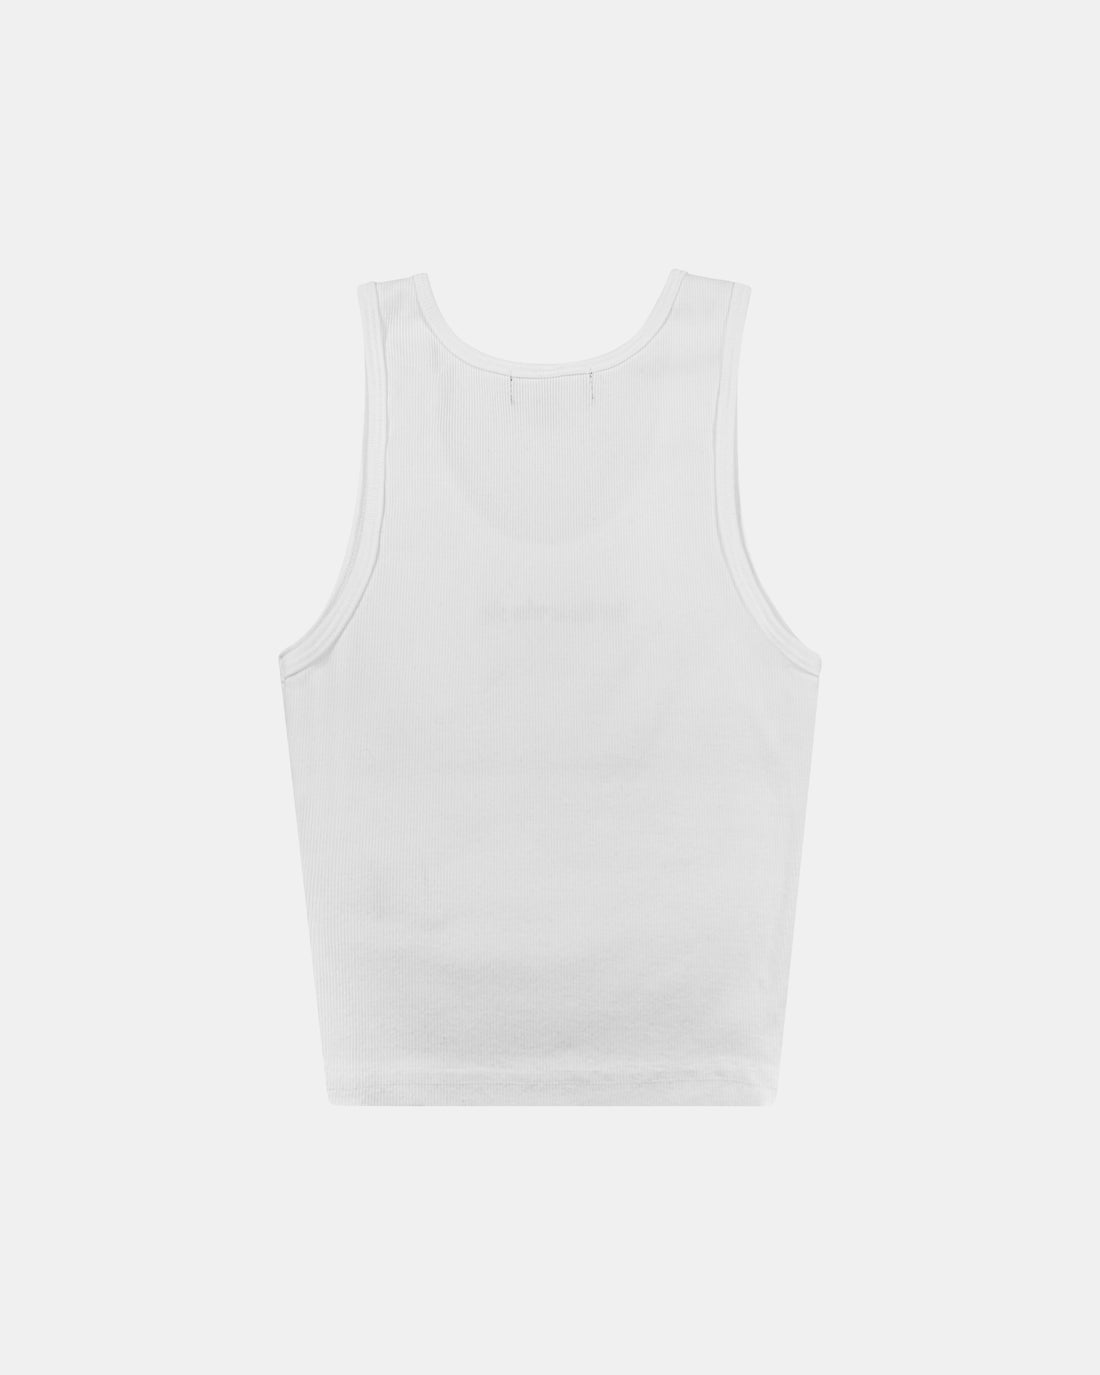 CROPPED TANK (2 COLORS)